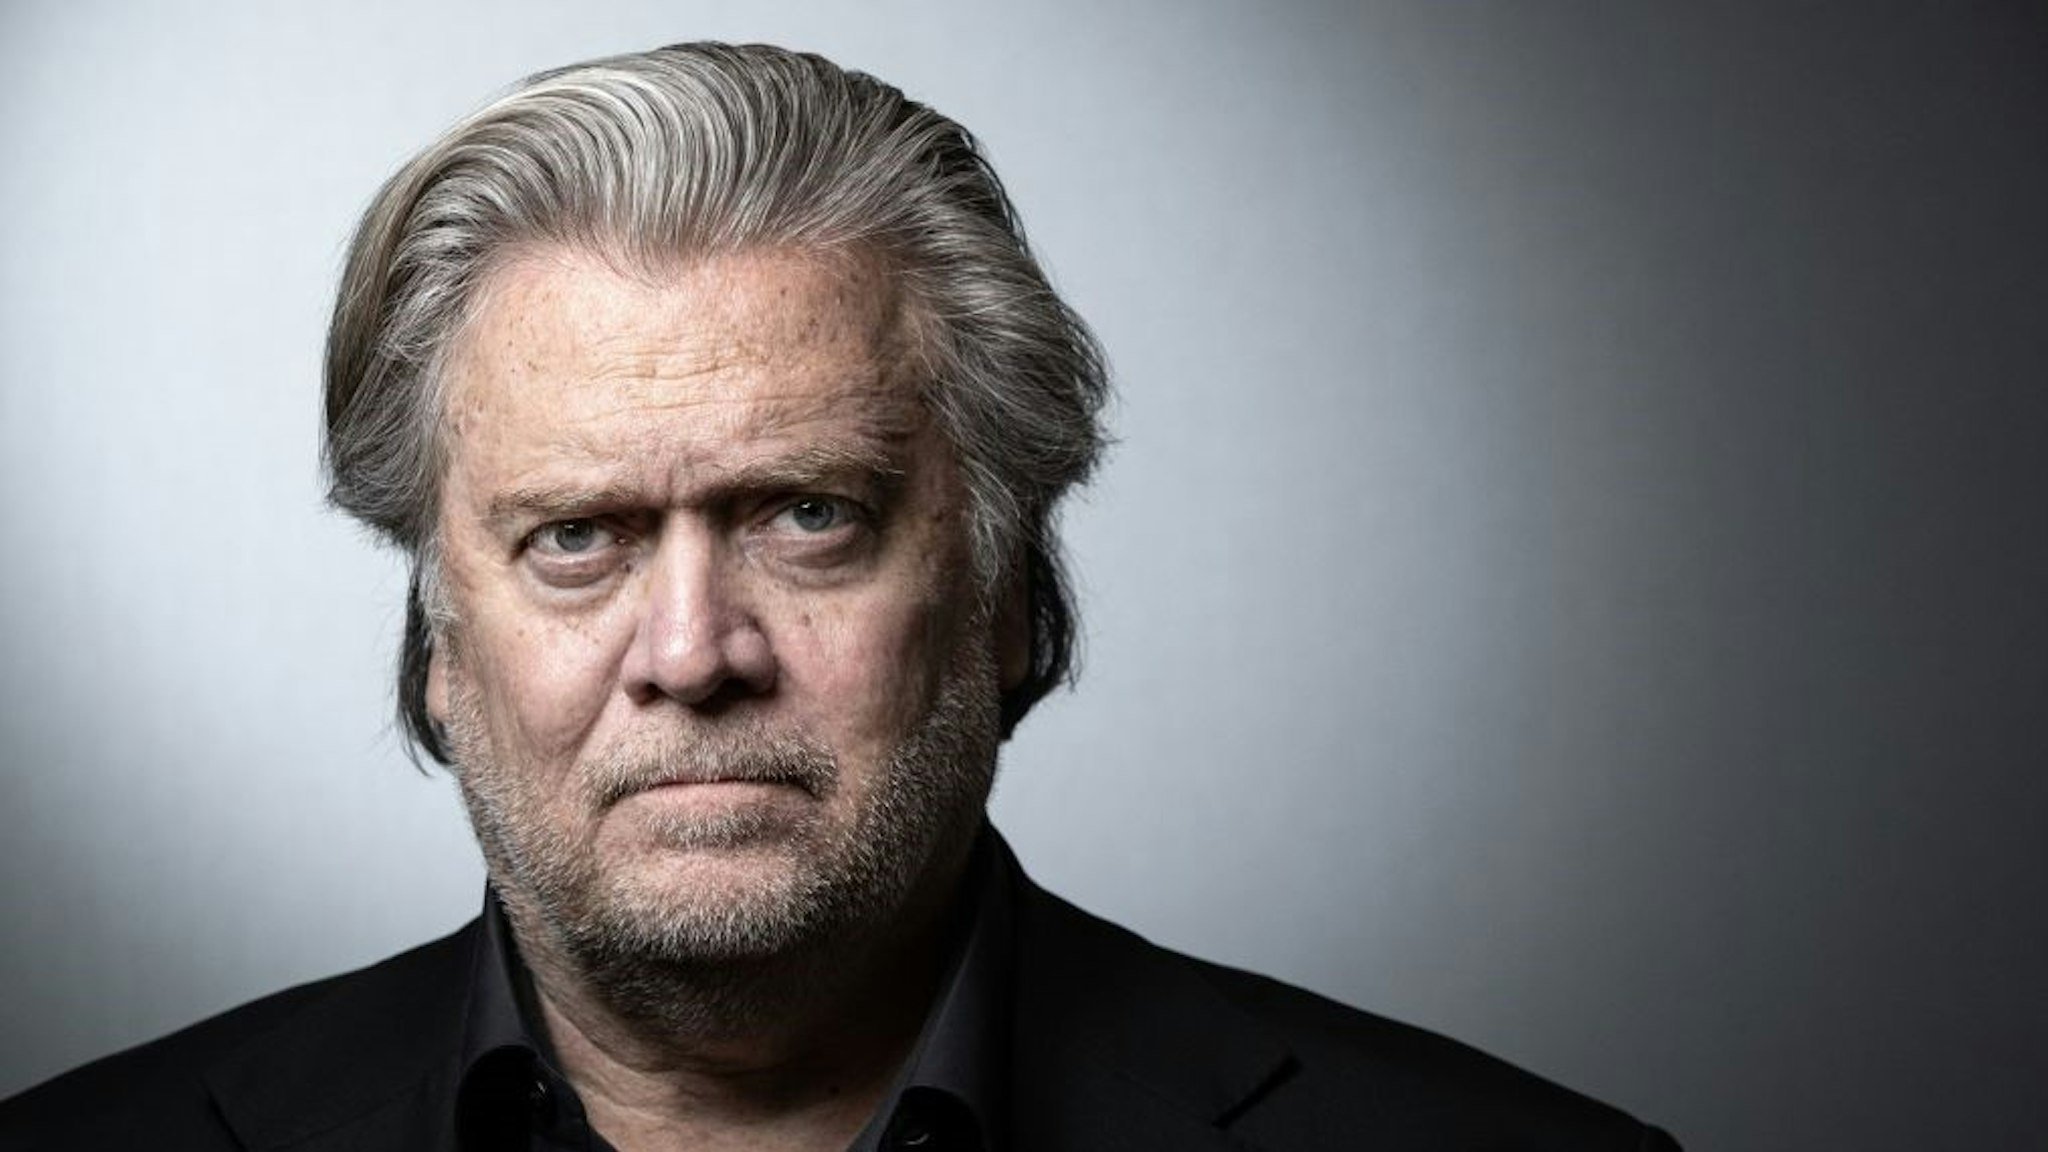 Former advisor to the US president and US publicist Steve Bannon poses during a photo session in Paris on May 27, 2019. (Photo by JOEL SAGET / AFP) (Photo credit should read J